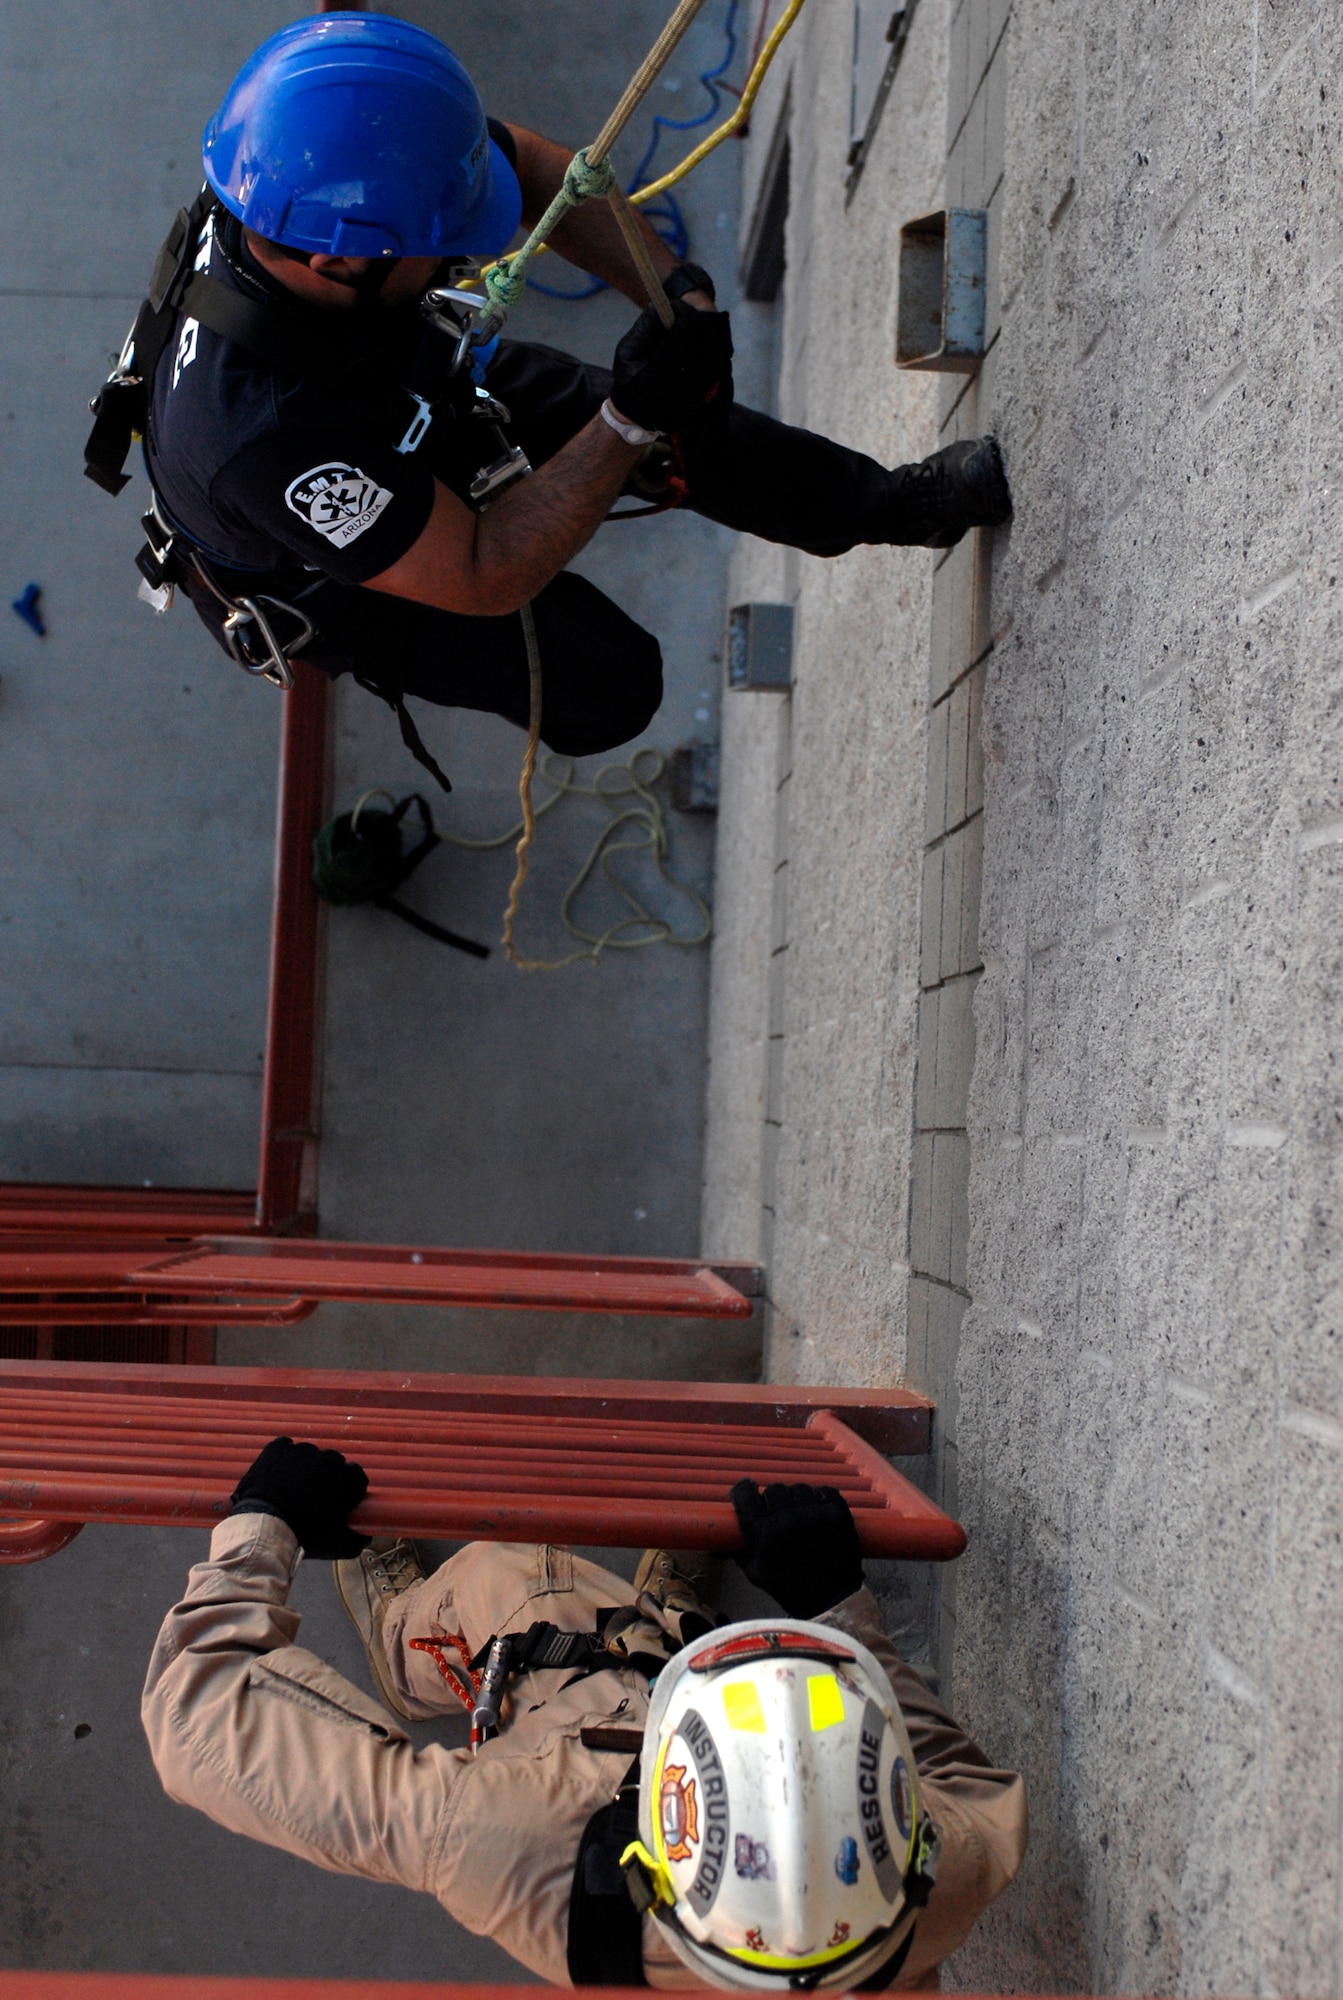 Mark Finchum, 56th Civil Engineer Squadron firefighter, performs a self rescue while instructor Staff Sgt. David Hagenbuch, 312th Training Squadron, Goodfellow Air Force Base, Texas, stands by evaluating him during the Rescue Technician 1 Course held at the Glendale Regional Public Safety Training Center.  (U.S. Air Force photo/Airman 1st Class Sandra Welch)